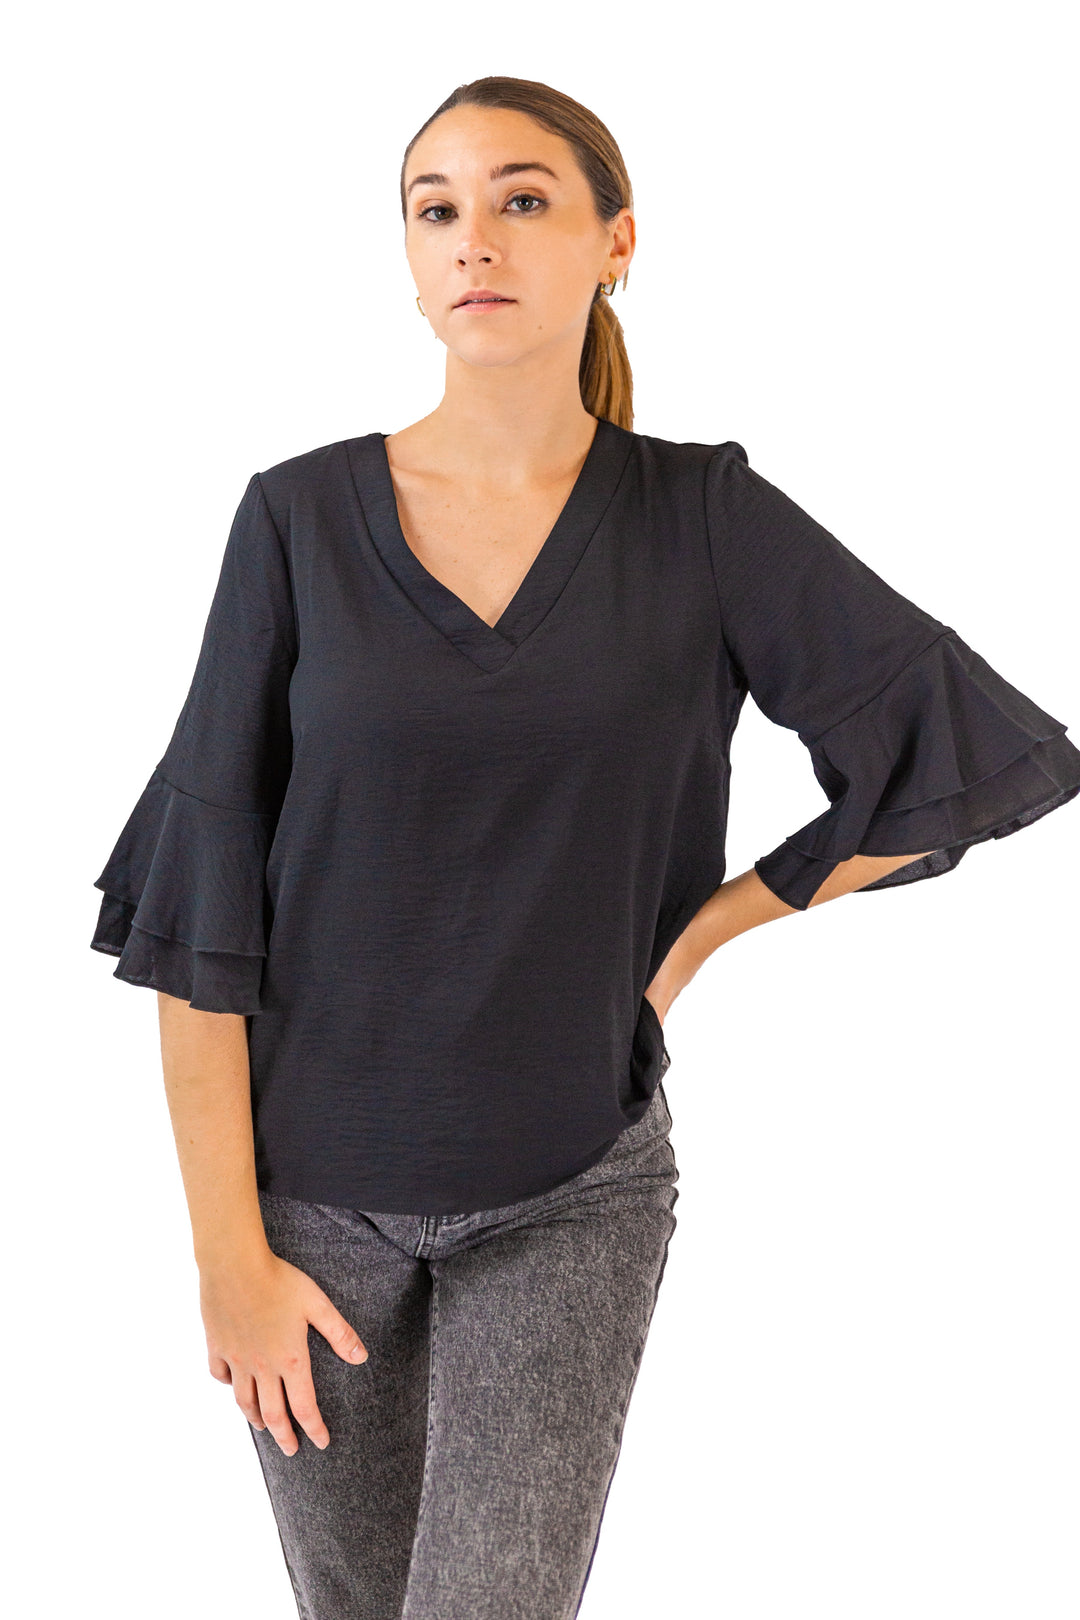 Fabonics Elegant Noir V-Neck Tunic with Bell Sleeves and Ruffle Detail in Classic Black